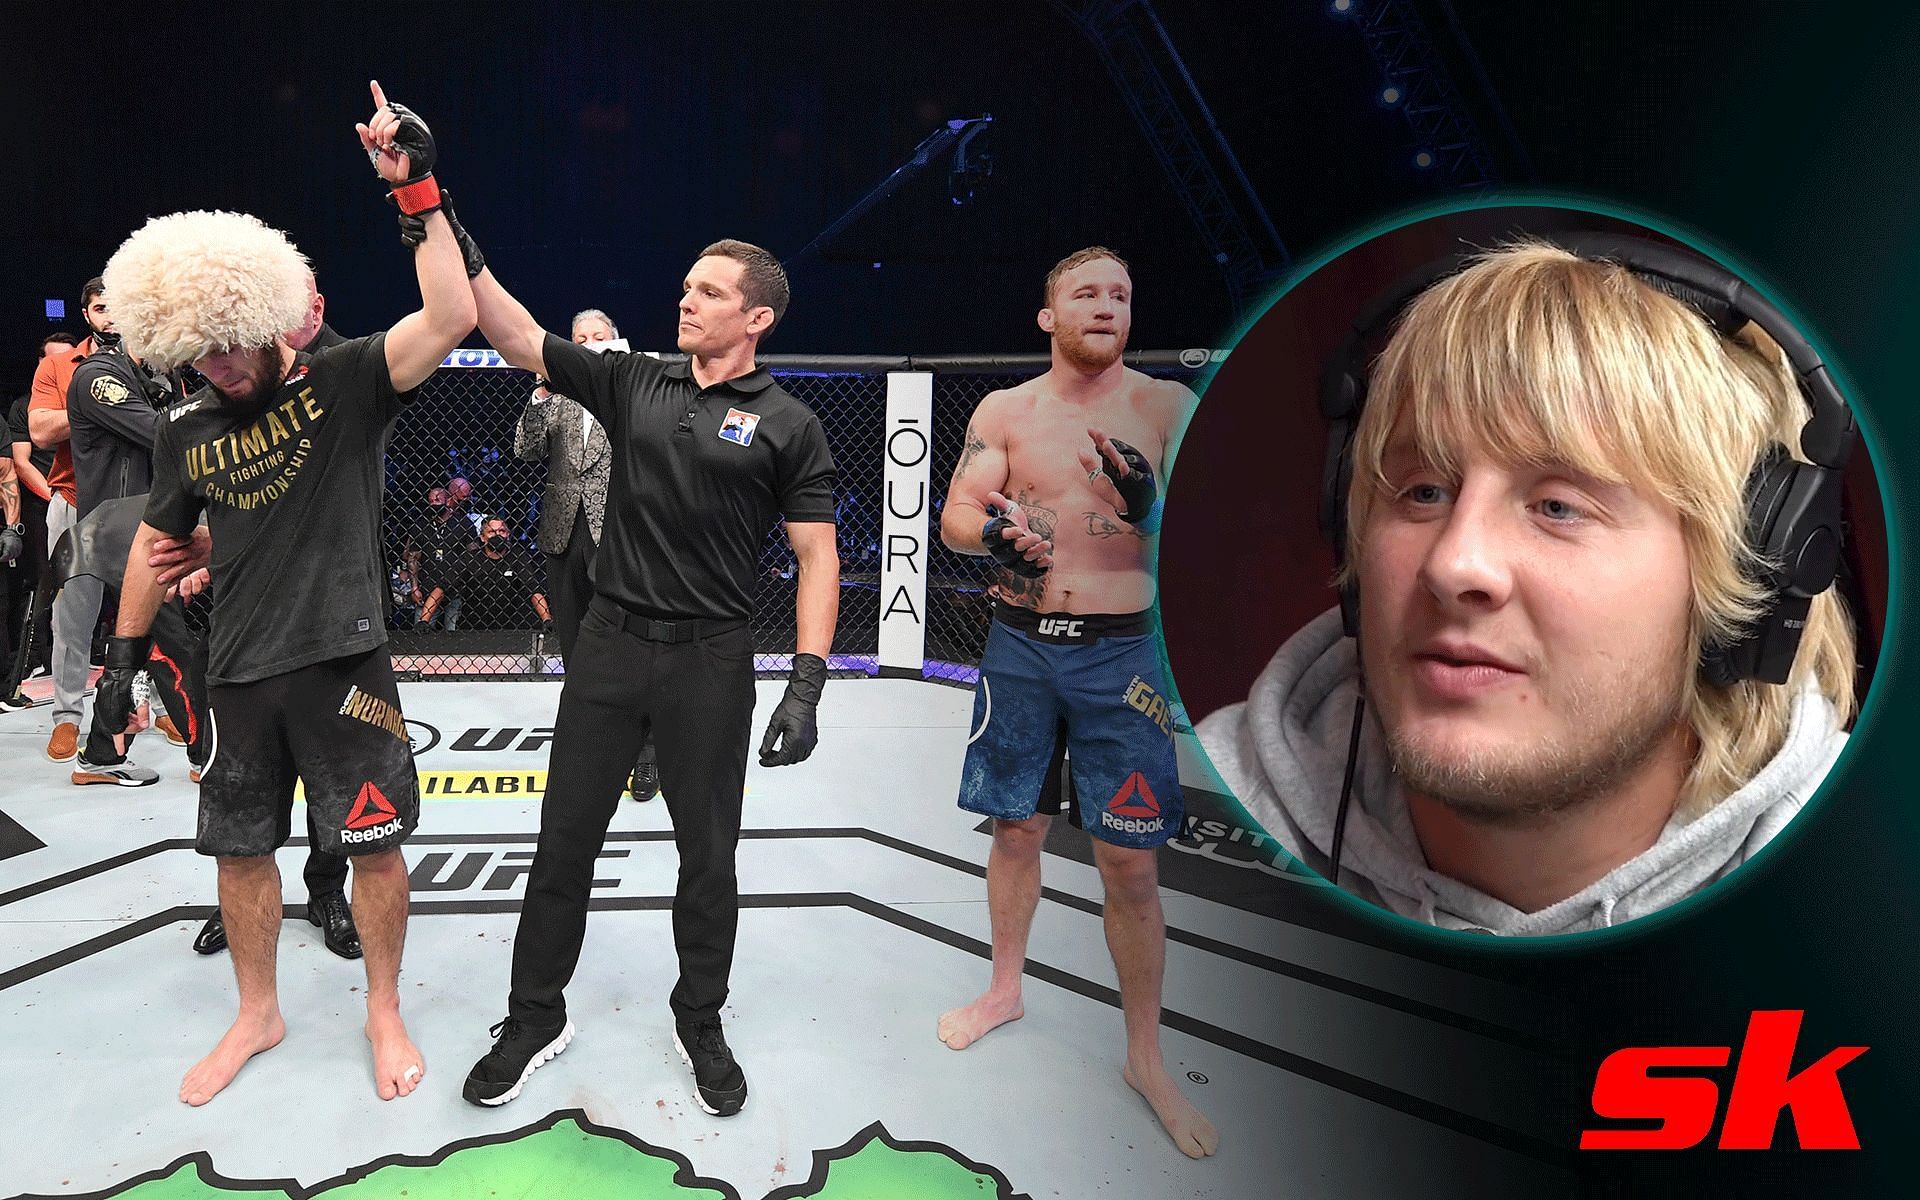 Paddy Pimblett and Khabib Nurmagomedov vs. Justin Gaethje at UFC 254 [Image credits: Getty Images and @theufcbaddy on Instagram]